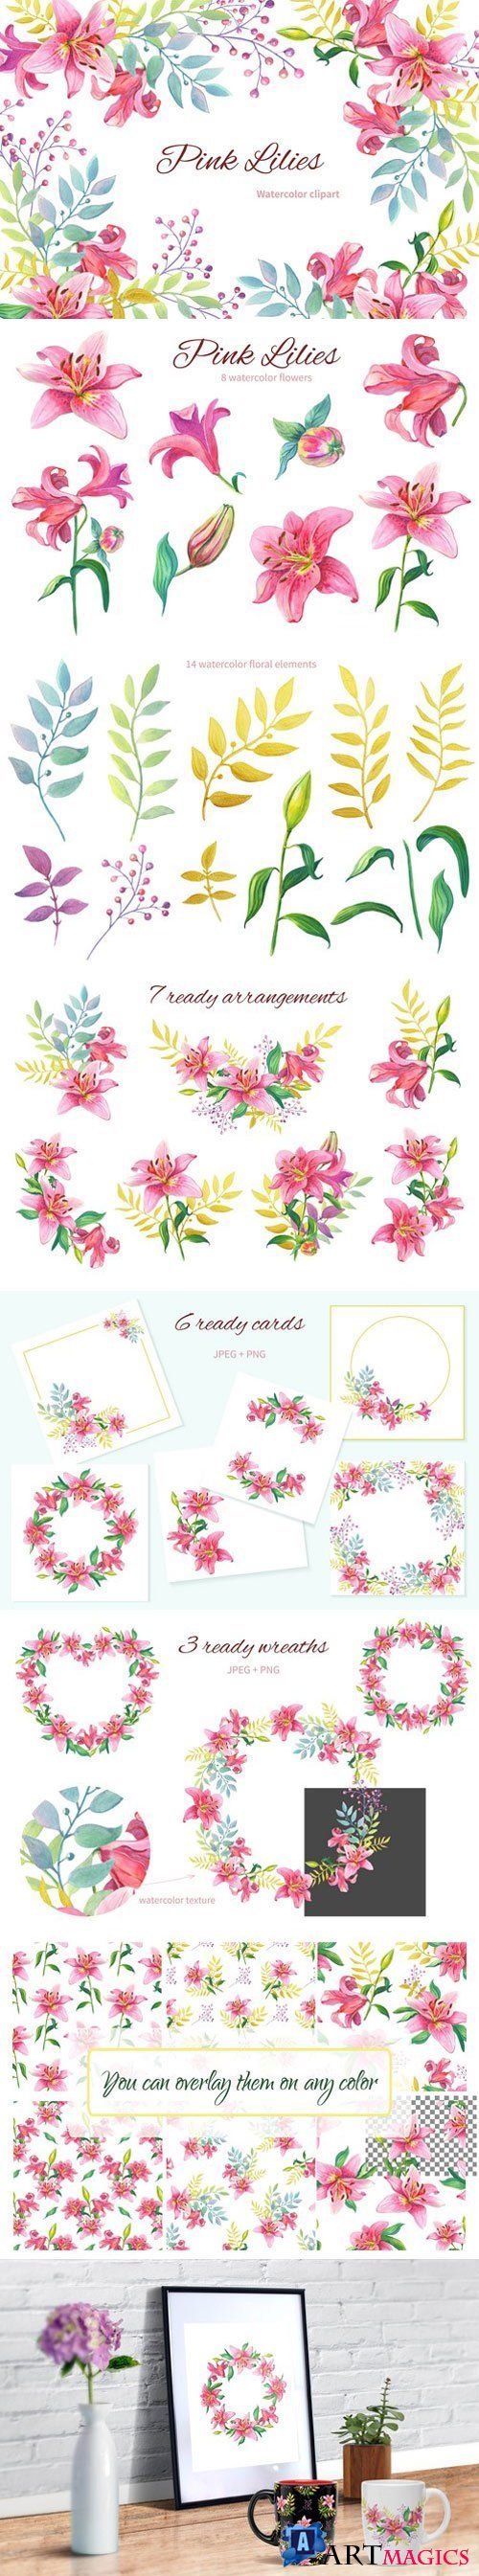 Pink Lilies. Watercolor clipart - 2071639